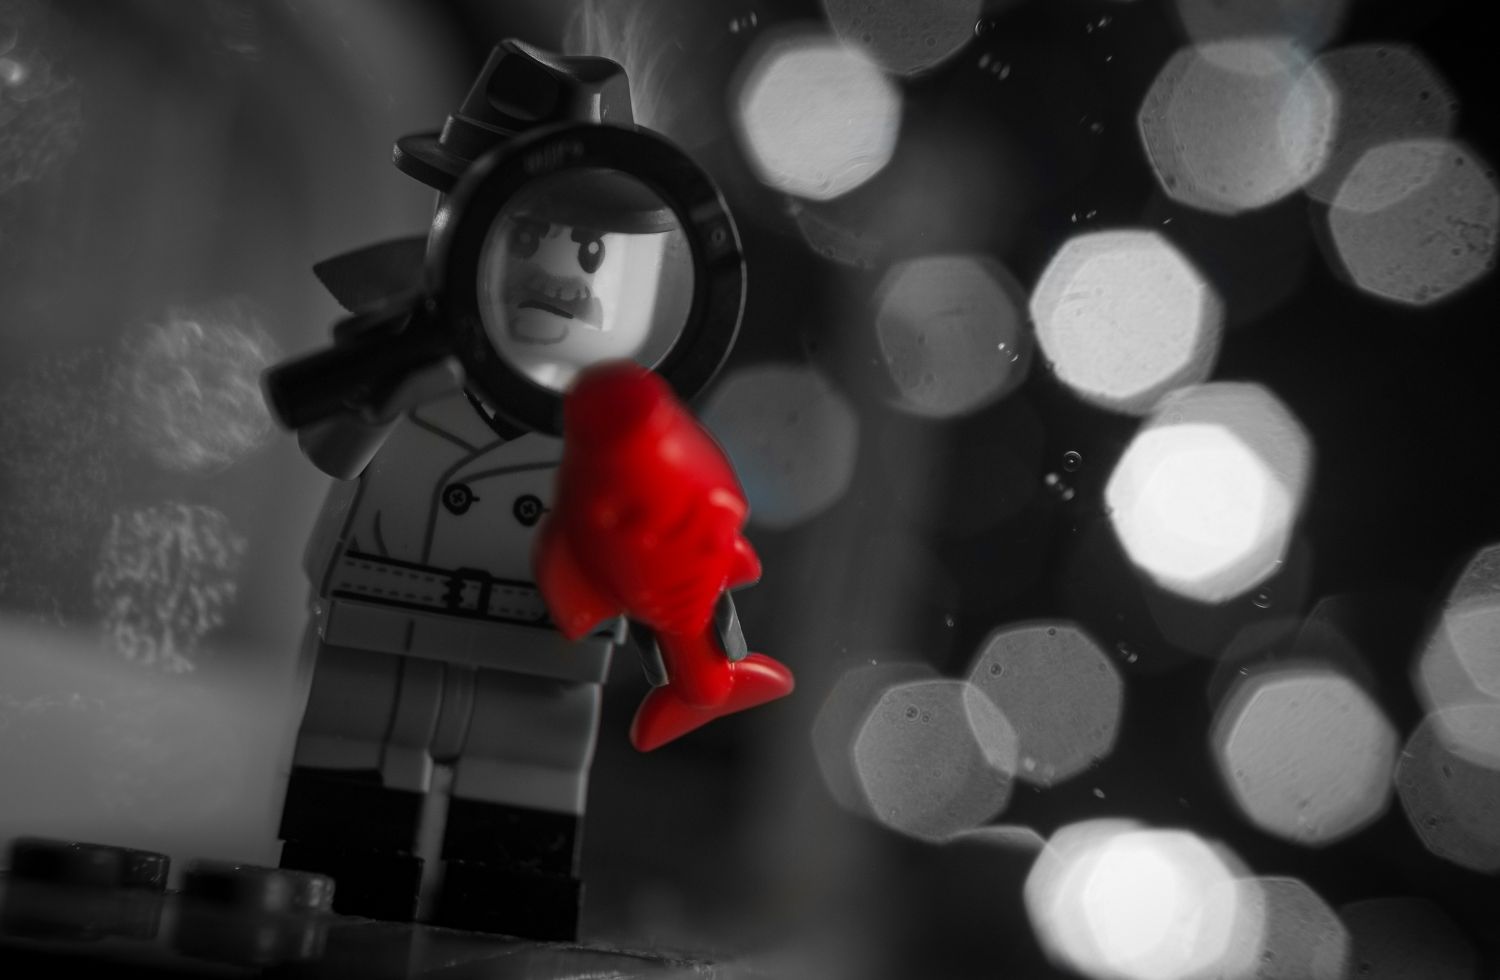 A LEGO noir detective in black and white, holding a red LEGO herring piece.